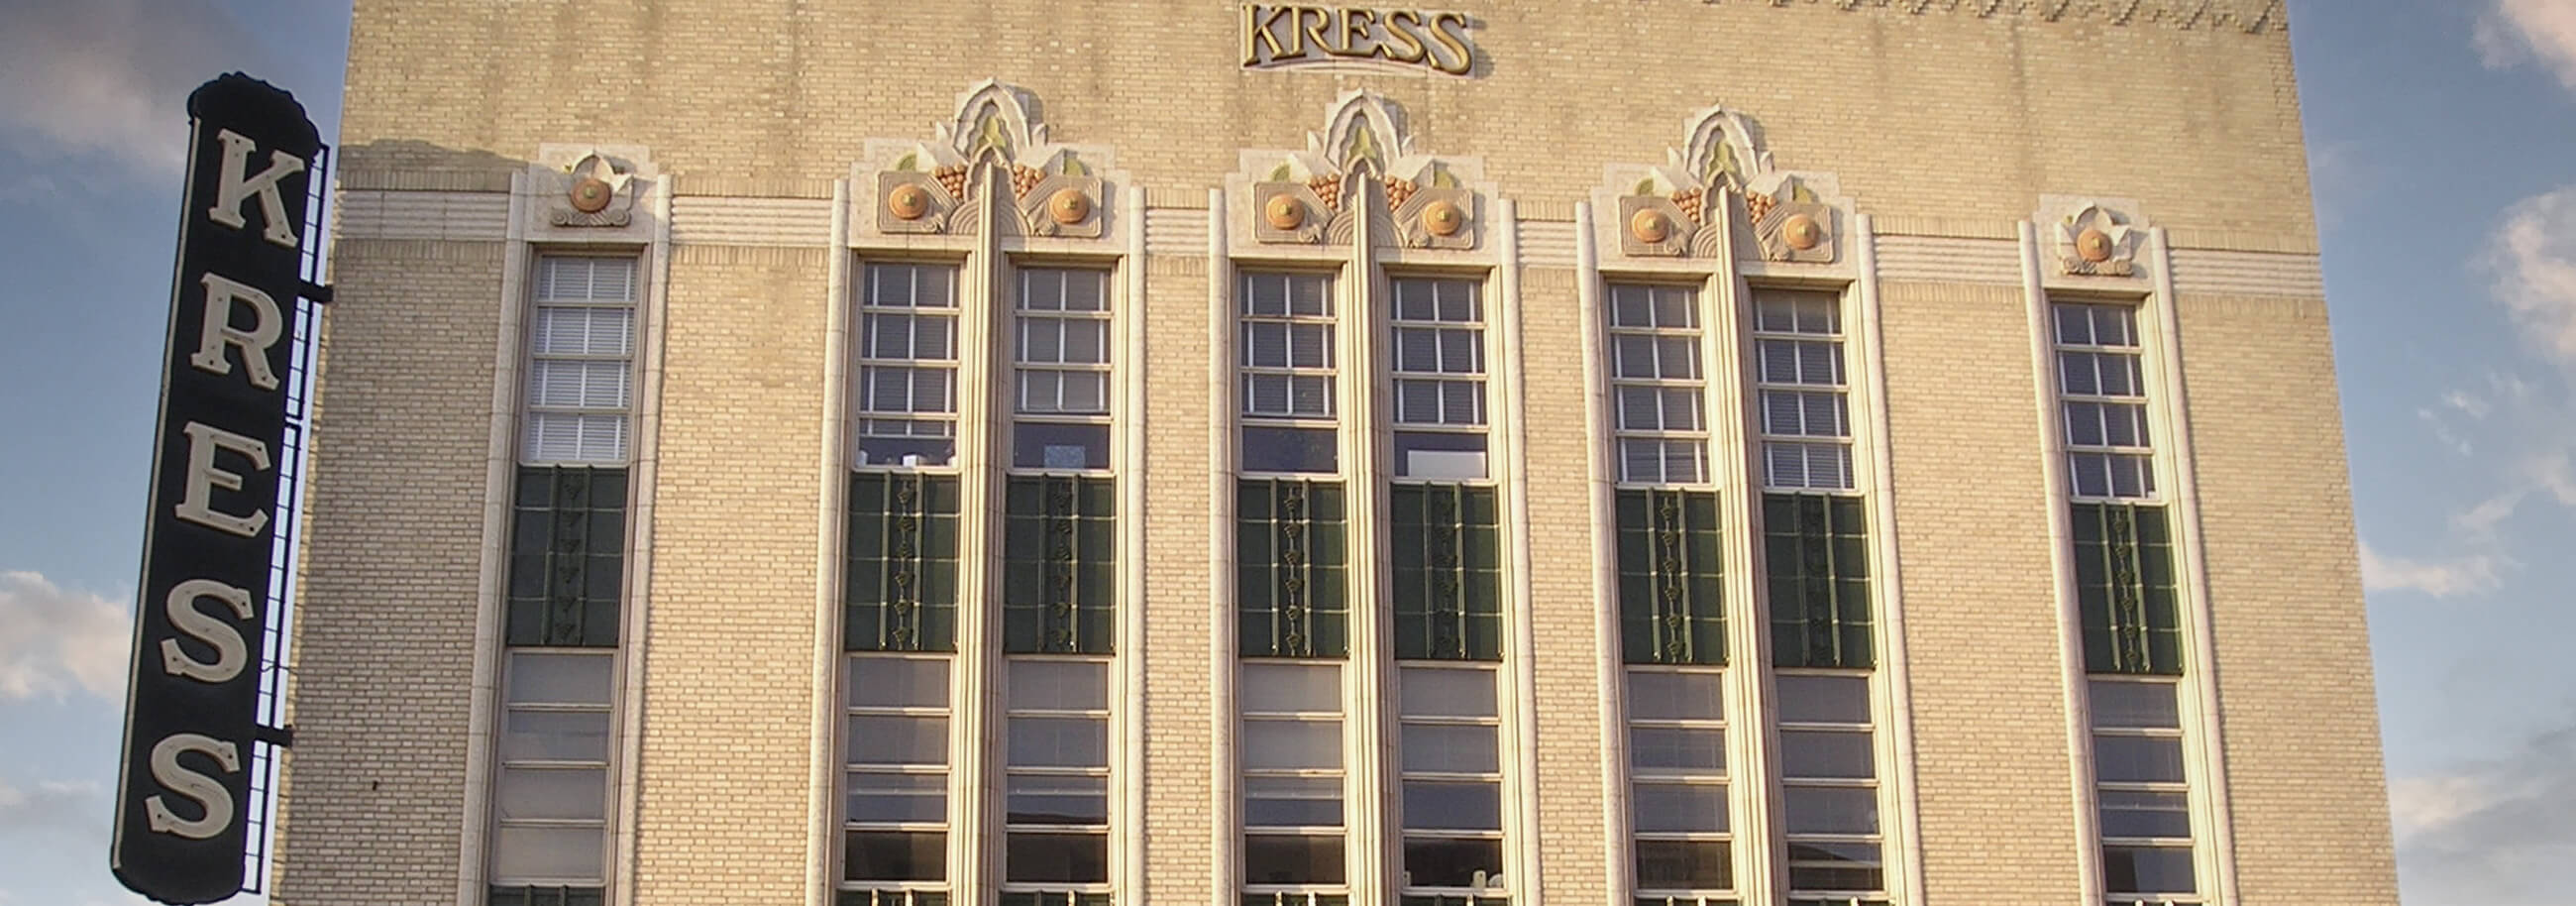 exterior of Kress building with clouds and blue sky overhead